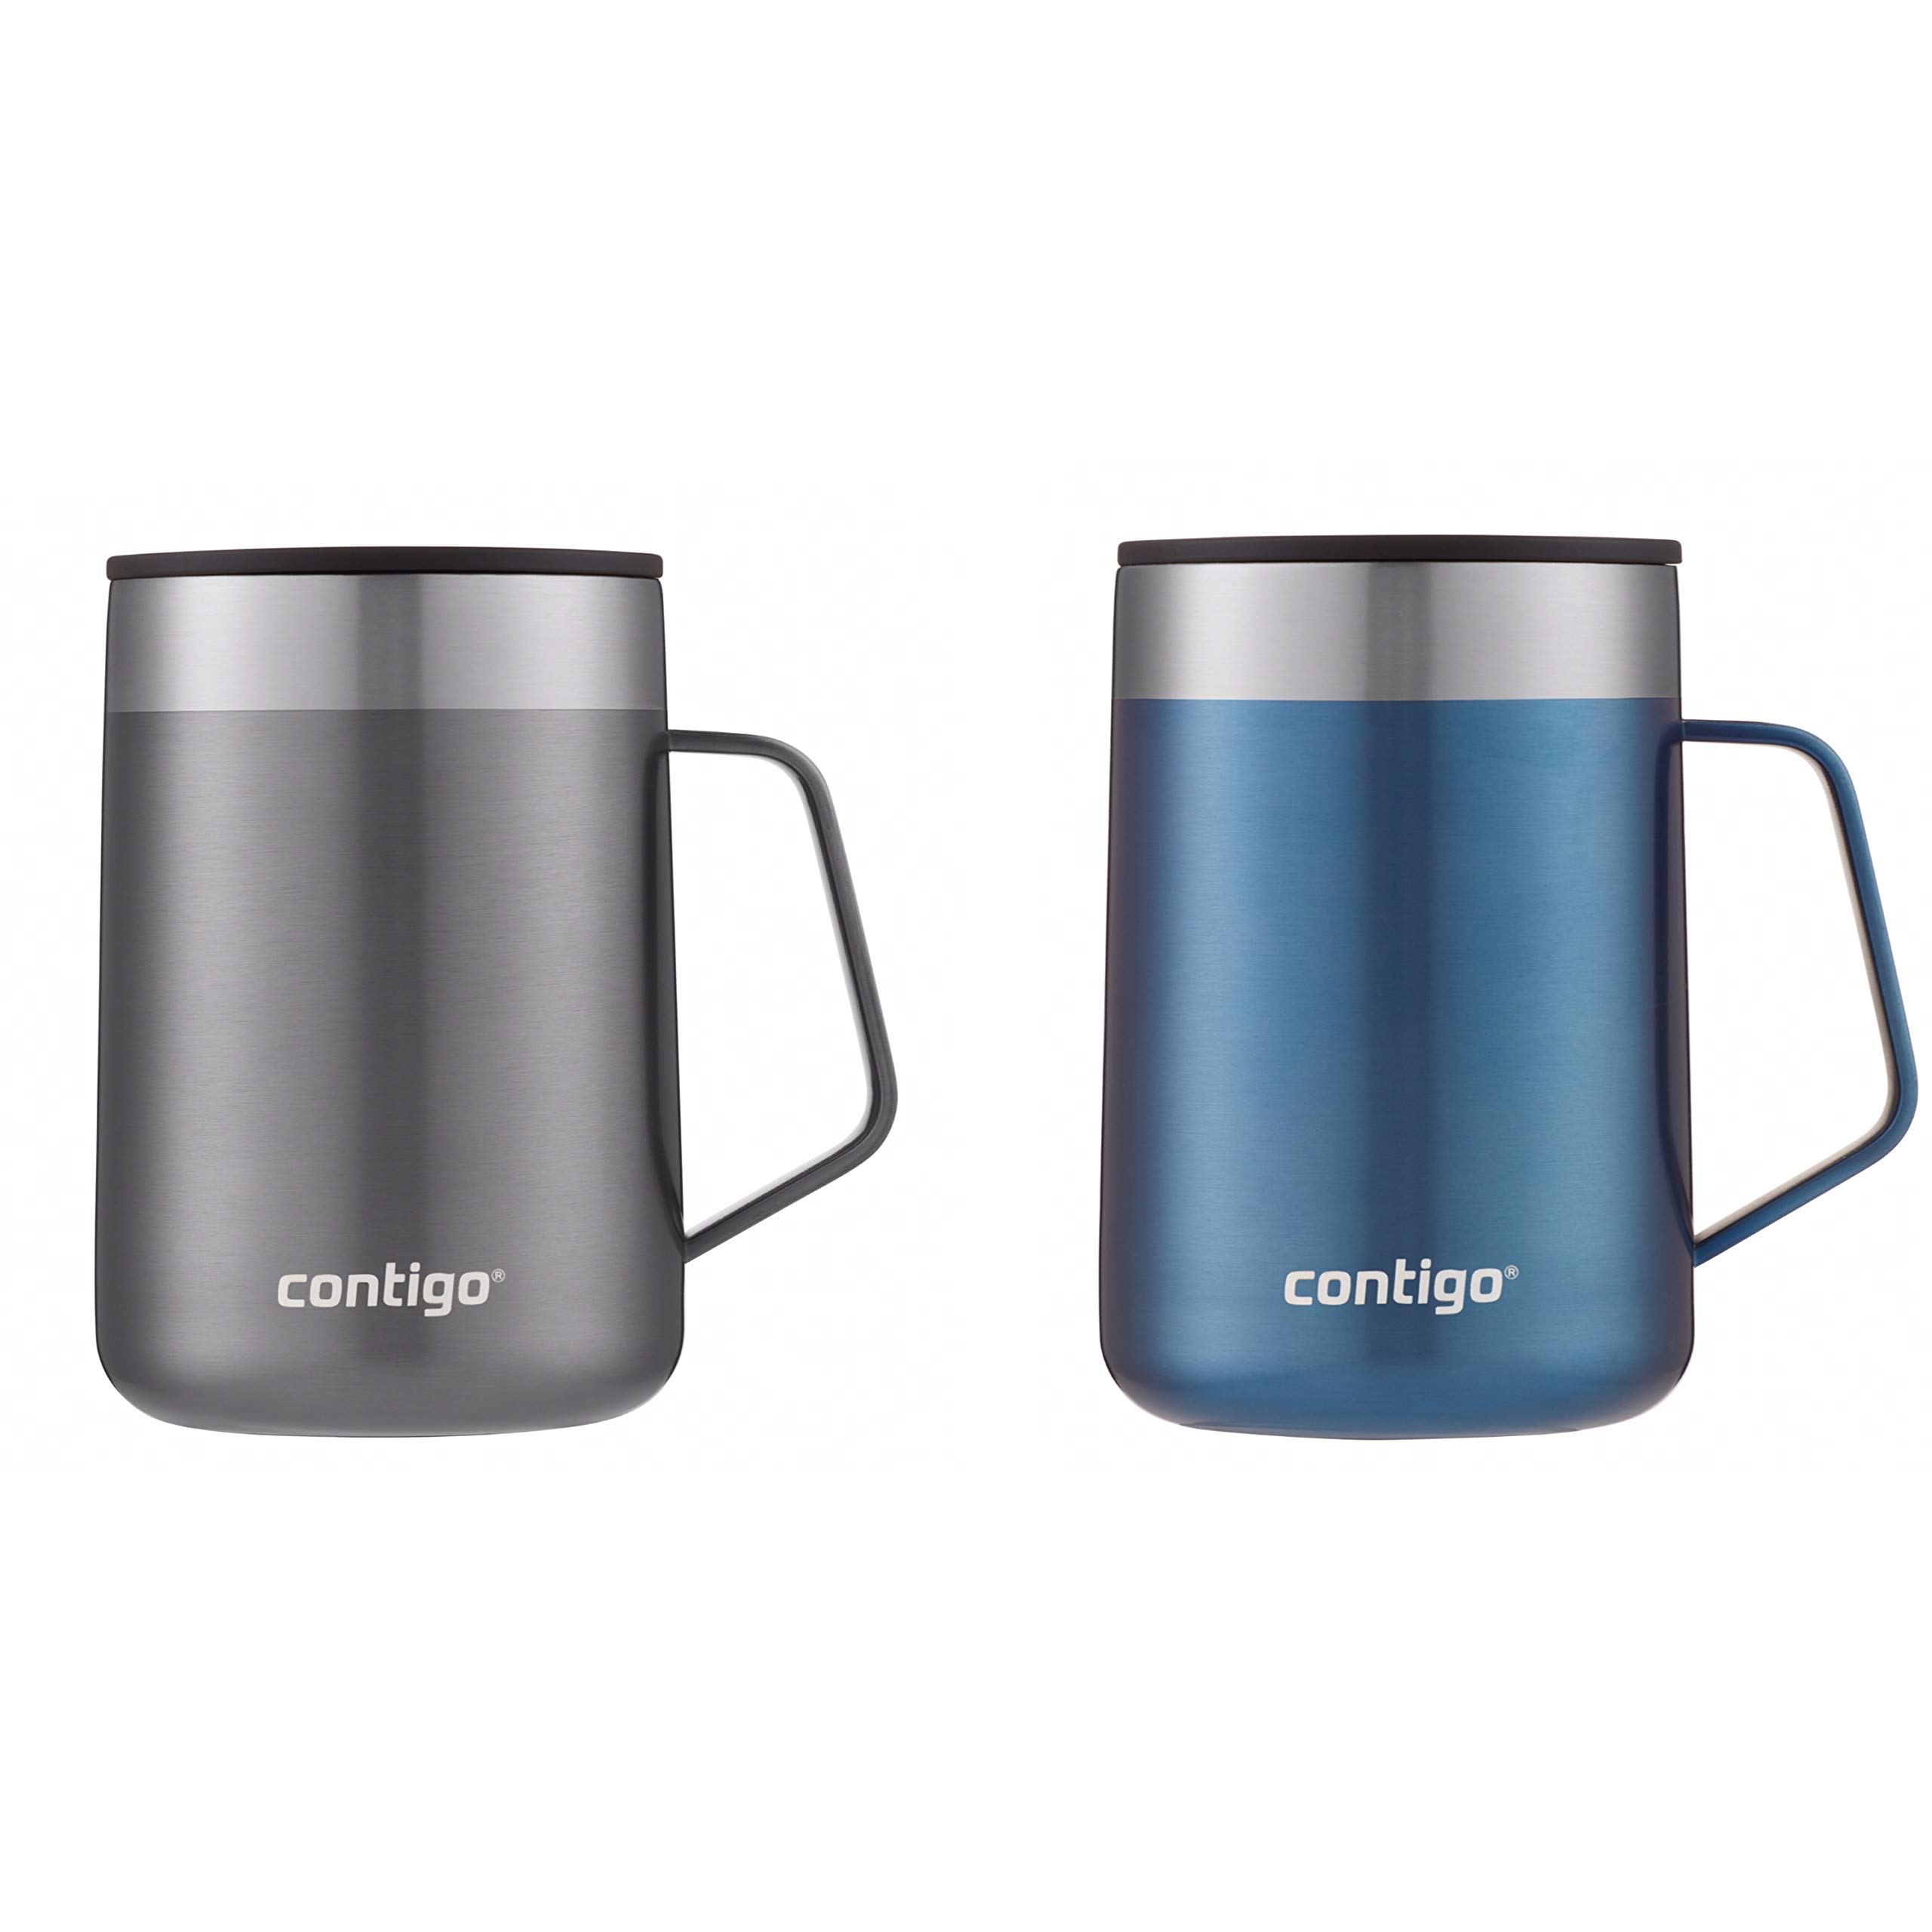 Contigo Stainless Steel Vacuum-Insulated Mug with Handle and Splash-Proof Lid - 2-Pack in Sake and Blue Corn